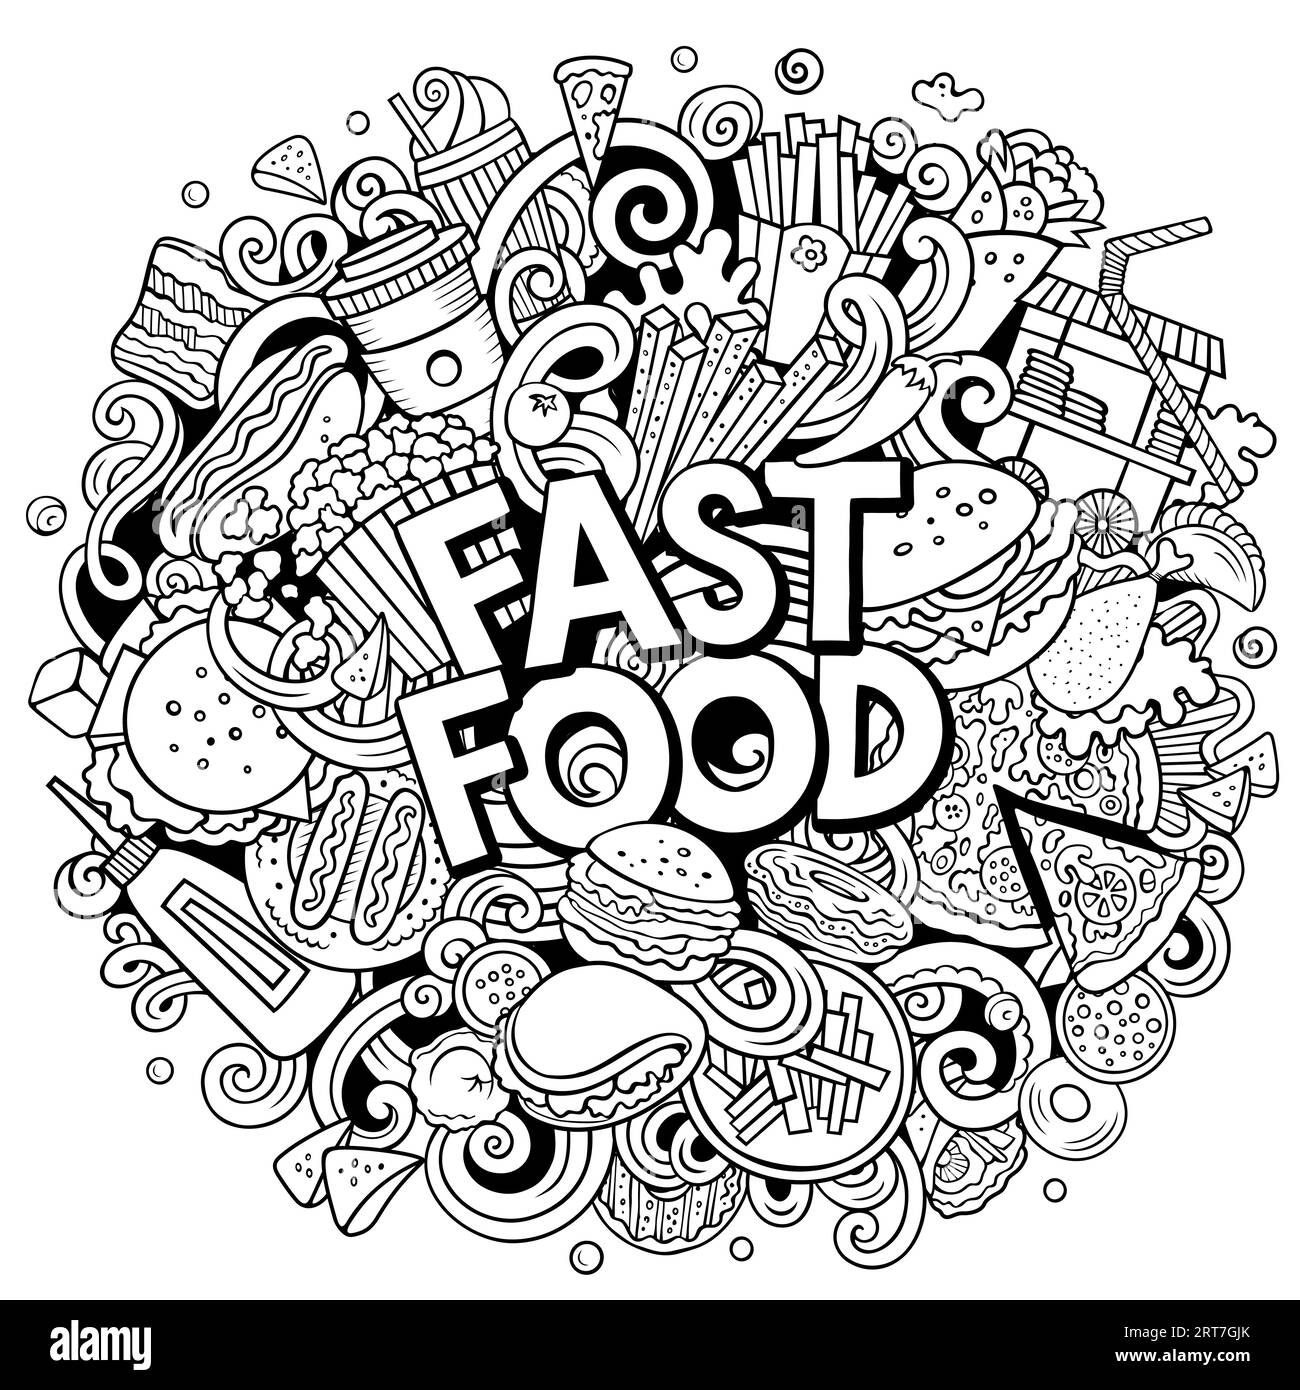 Fastfood cartoon doodles illustration. Fast food funny objects and elements vector design. Stock Vector